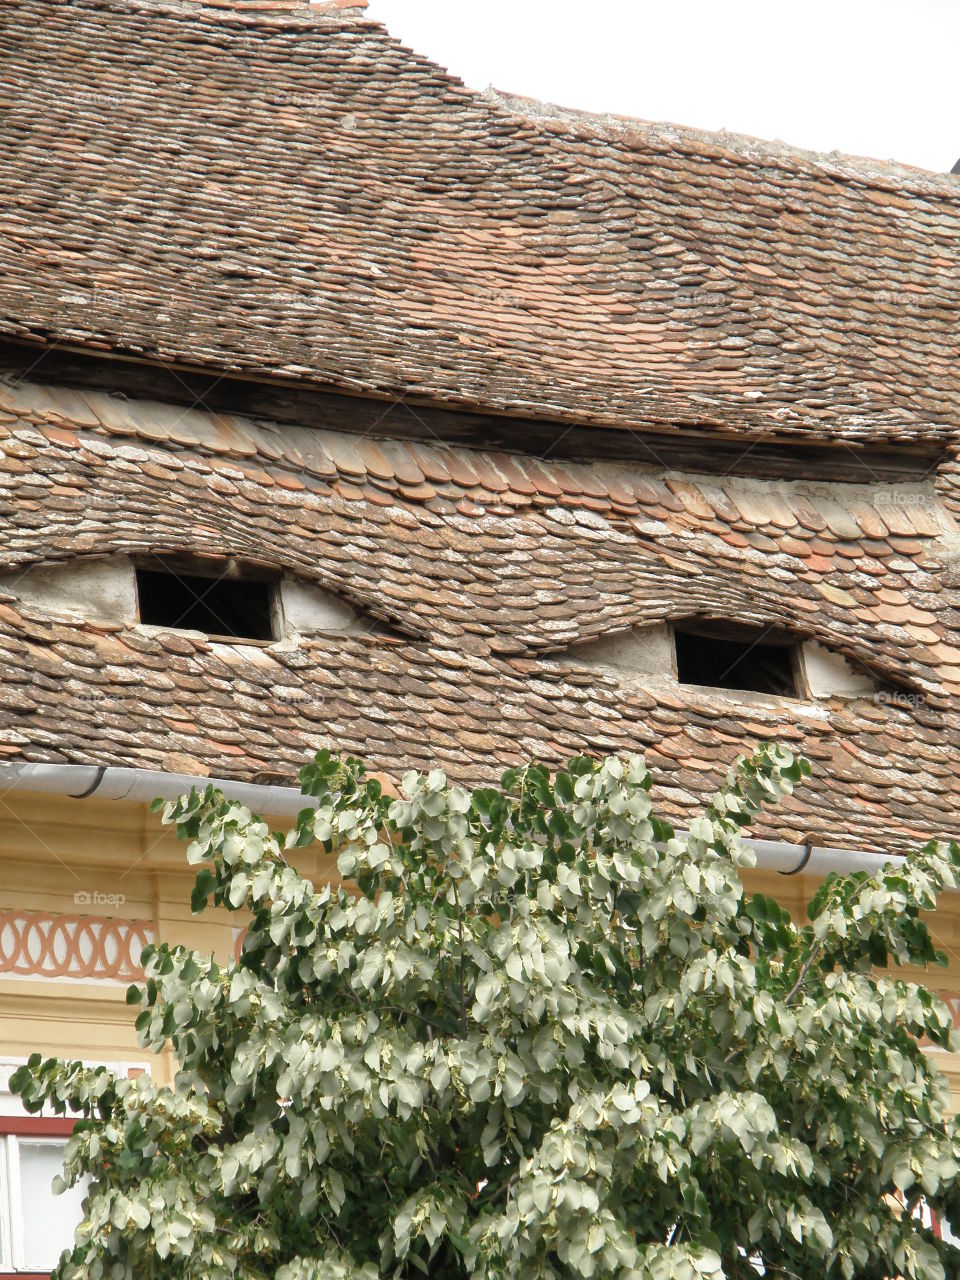 Eye-shaped roofing